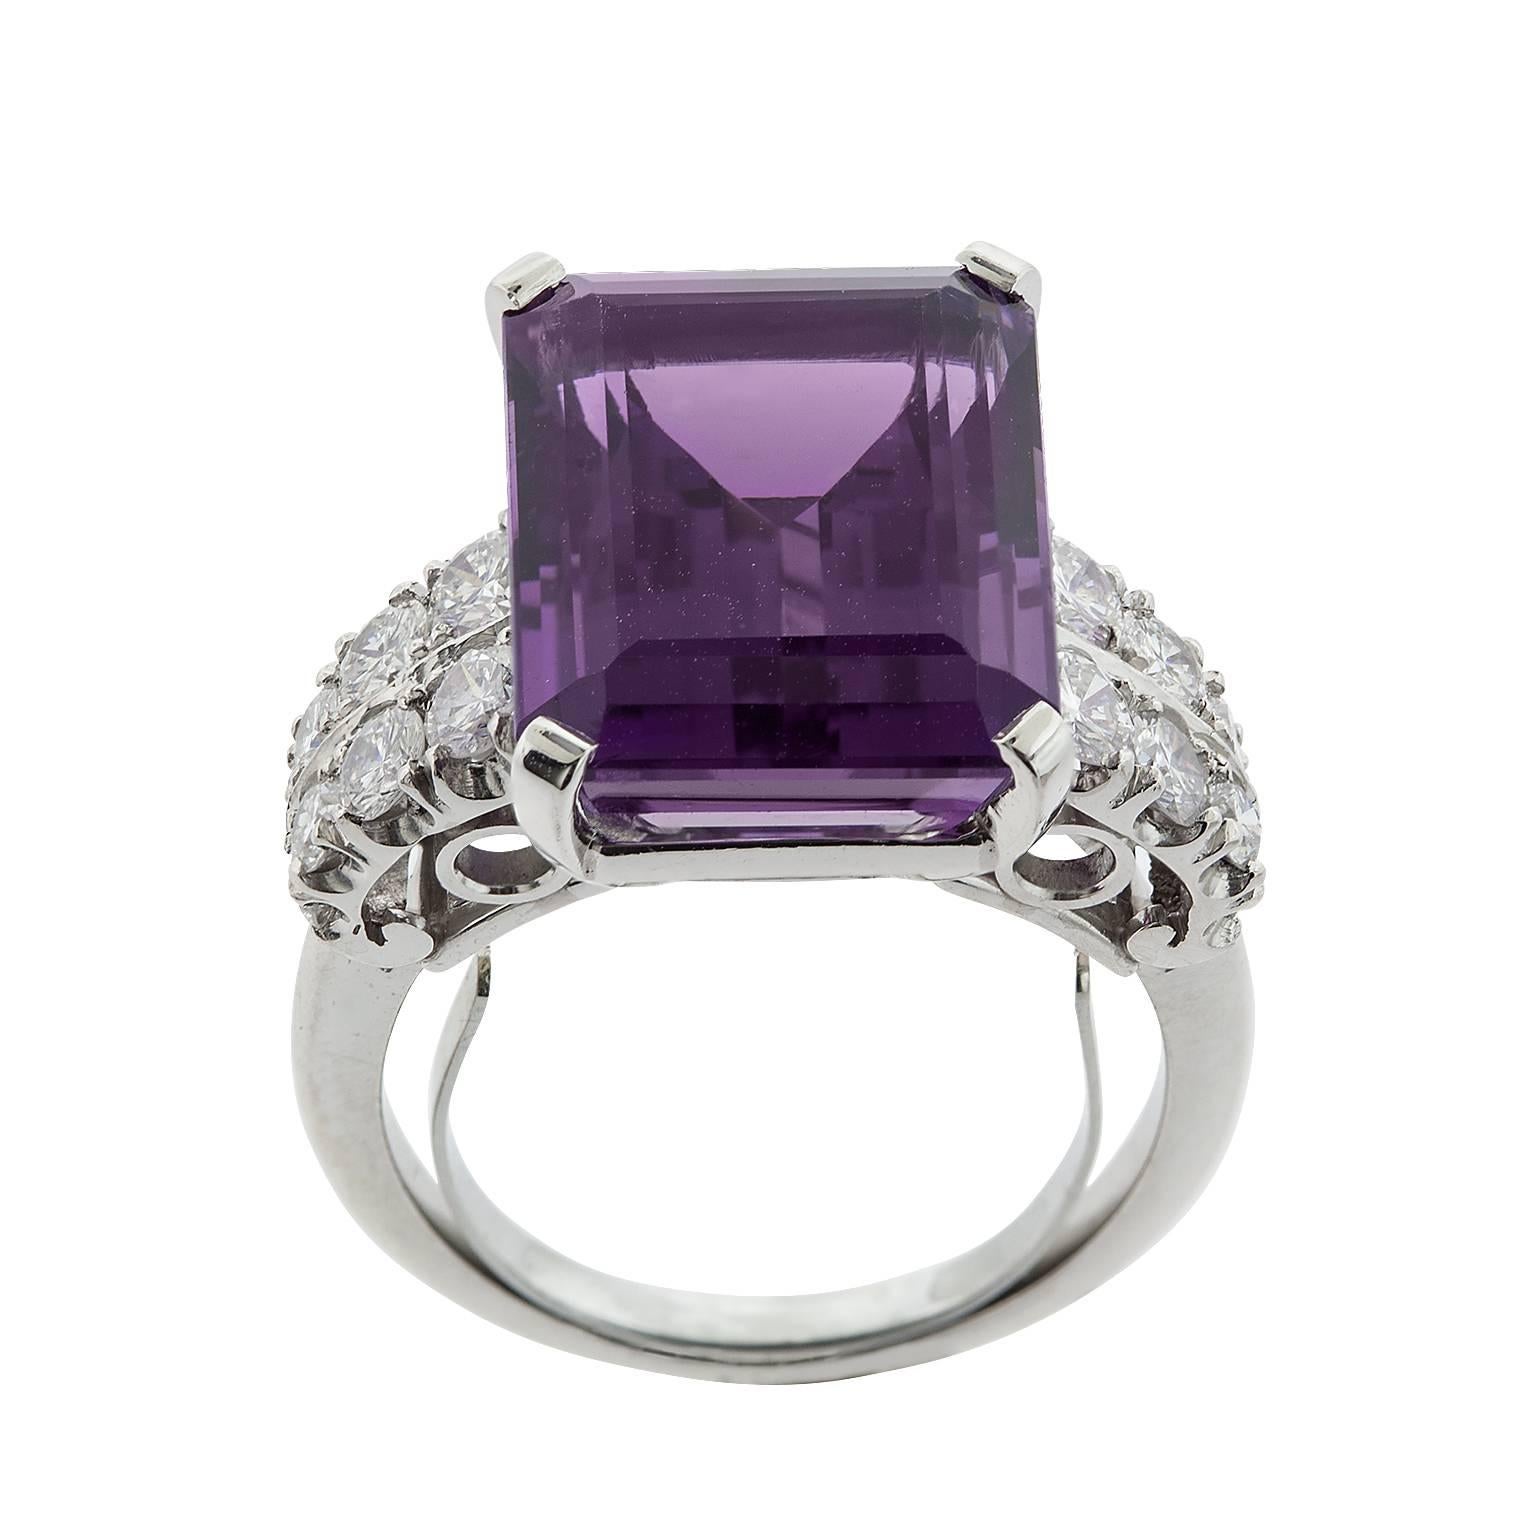 A 10.54 carat emerald cut amethyst and round brilliant diamond ring set in platinum.  The amethyst is set in a four prong basket, with a double row of diamonds on either side.  The diamonds are graded as G color, VS clarity, and have a total weight